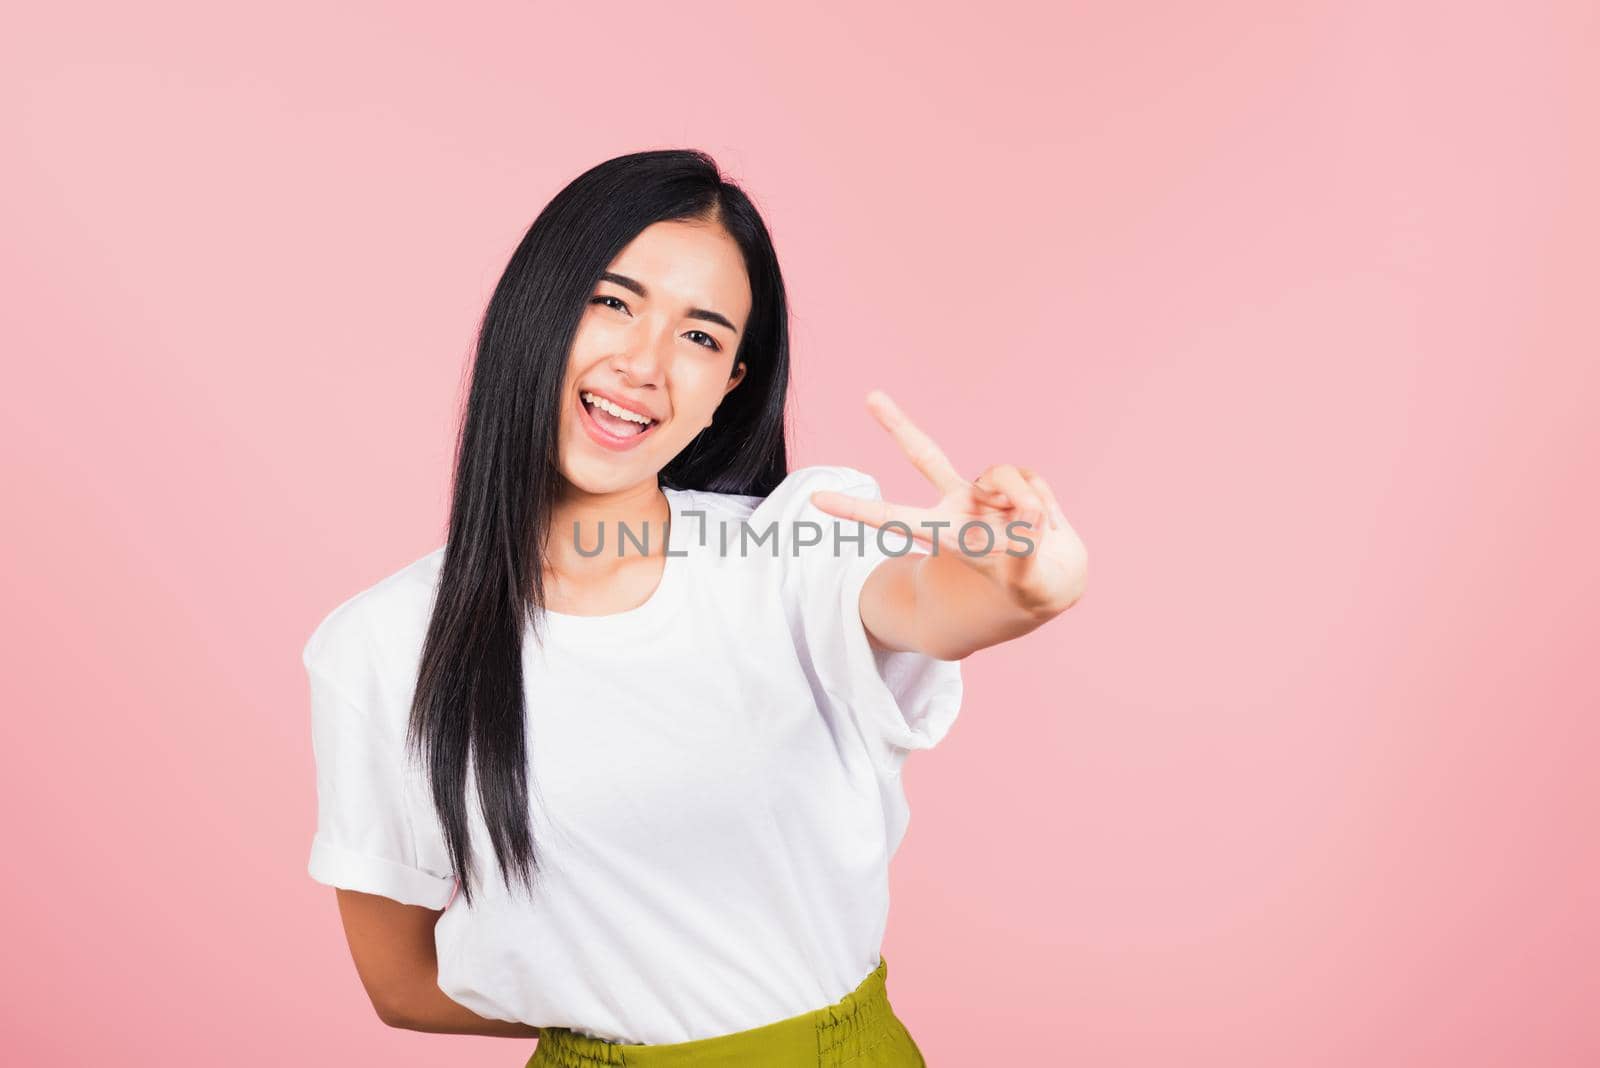 woman teen smile standing showing finger making v-sign victory symbol by Sorapop